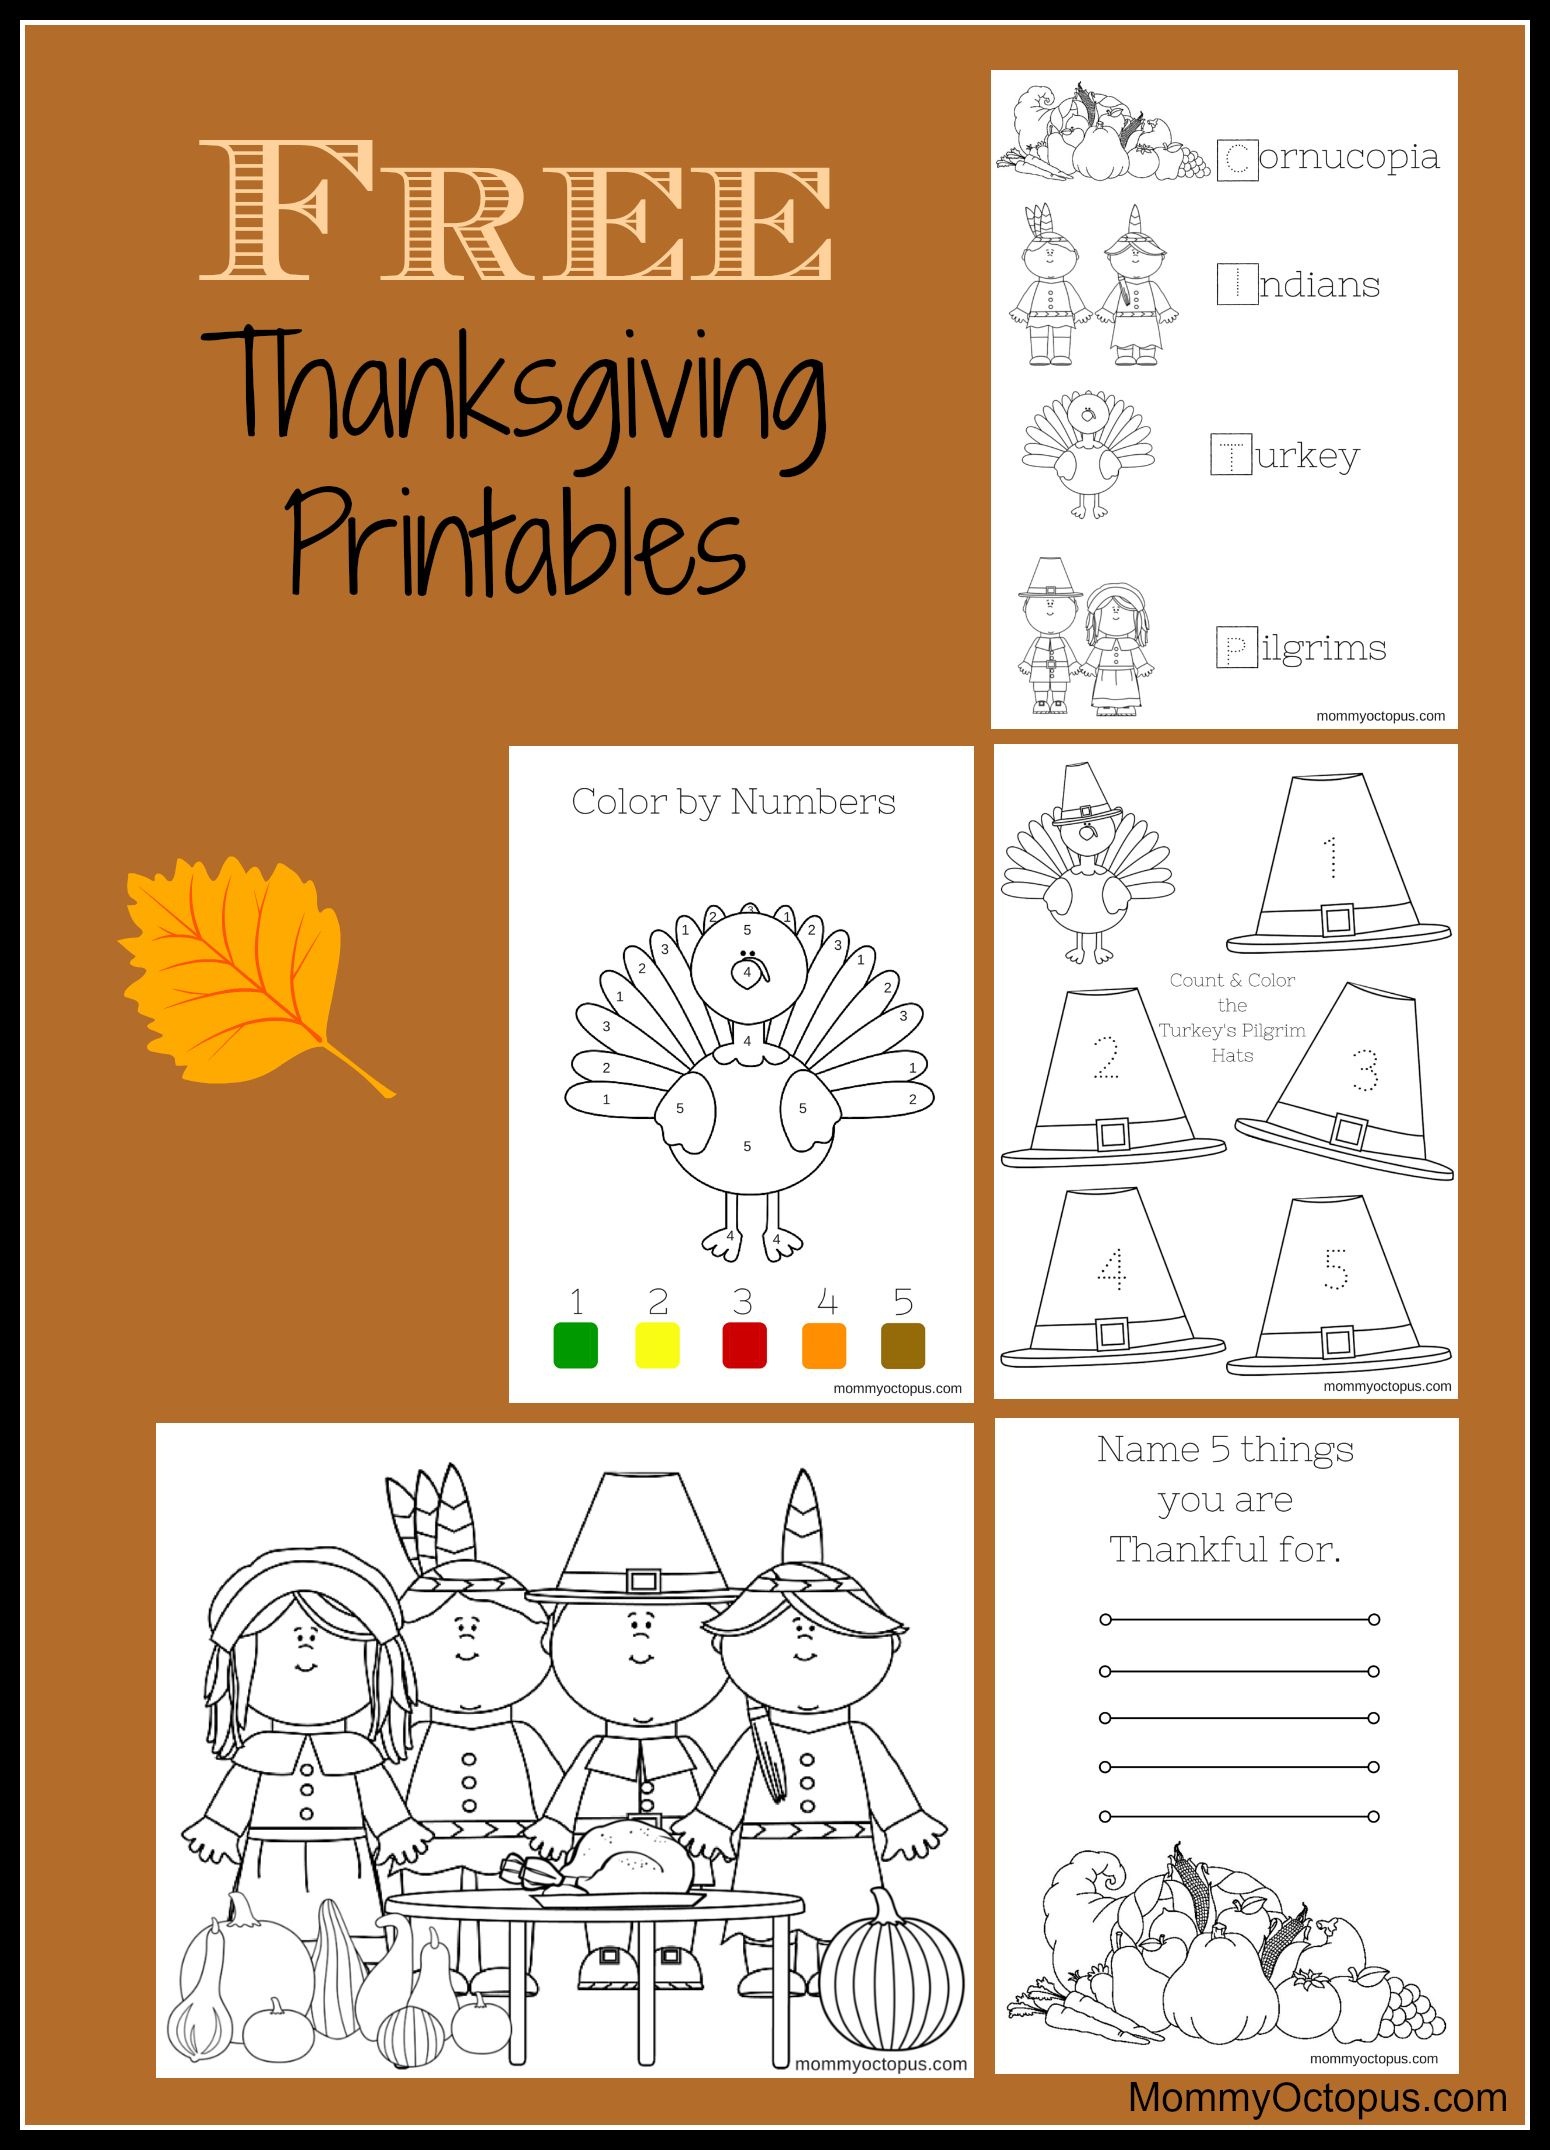 Free Thanksgiving Printable Activity Sheets! | Thanksgiving &amp;amp; Fall - Free Printable Kindergarten Thanksgiving Activities